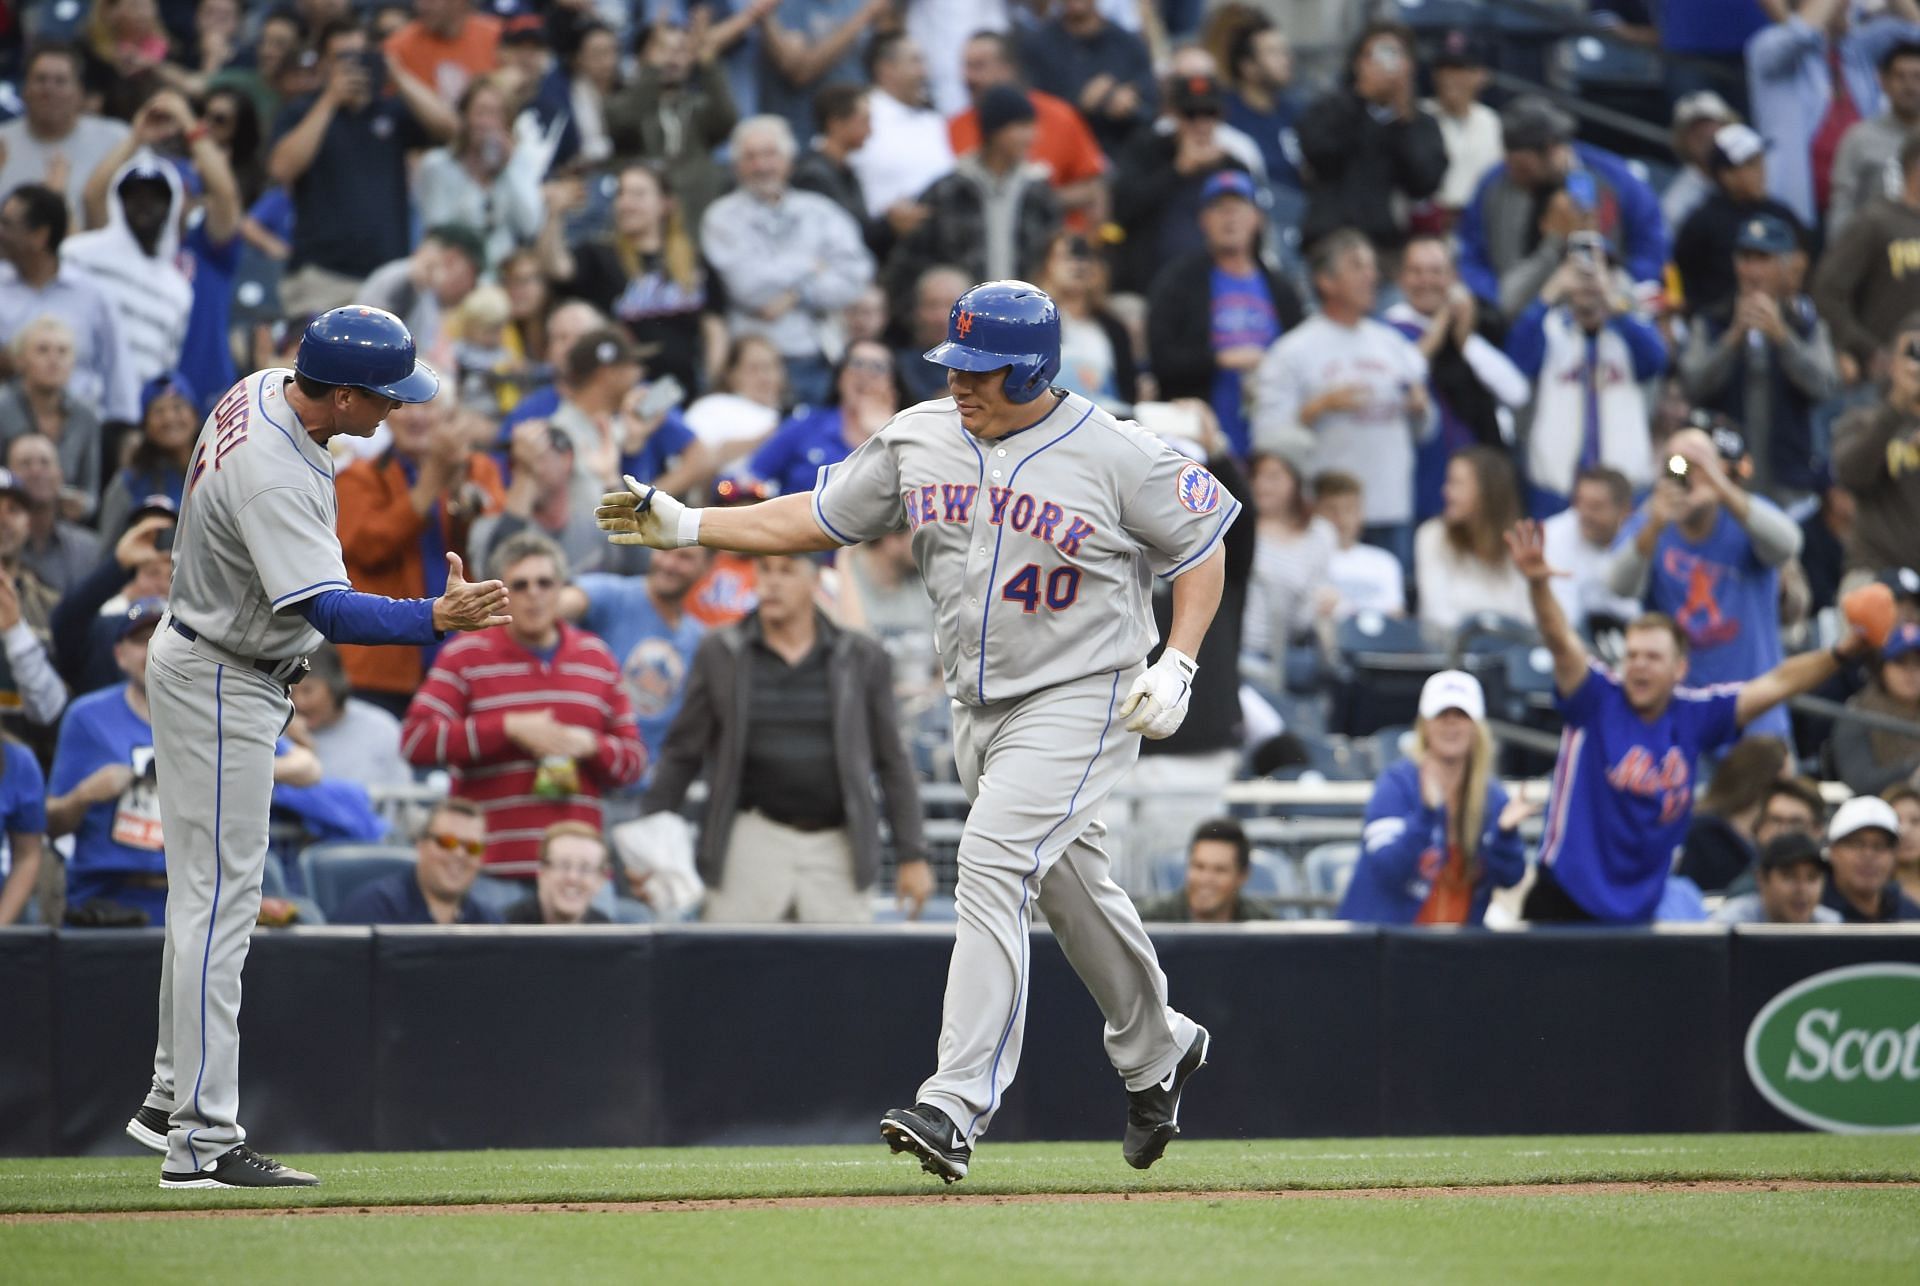 Bart's homer: Colon marks unexpected blast with first pitch